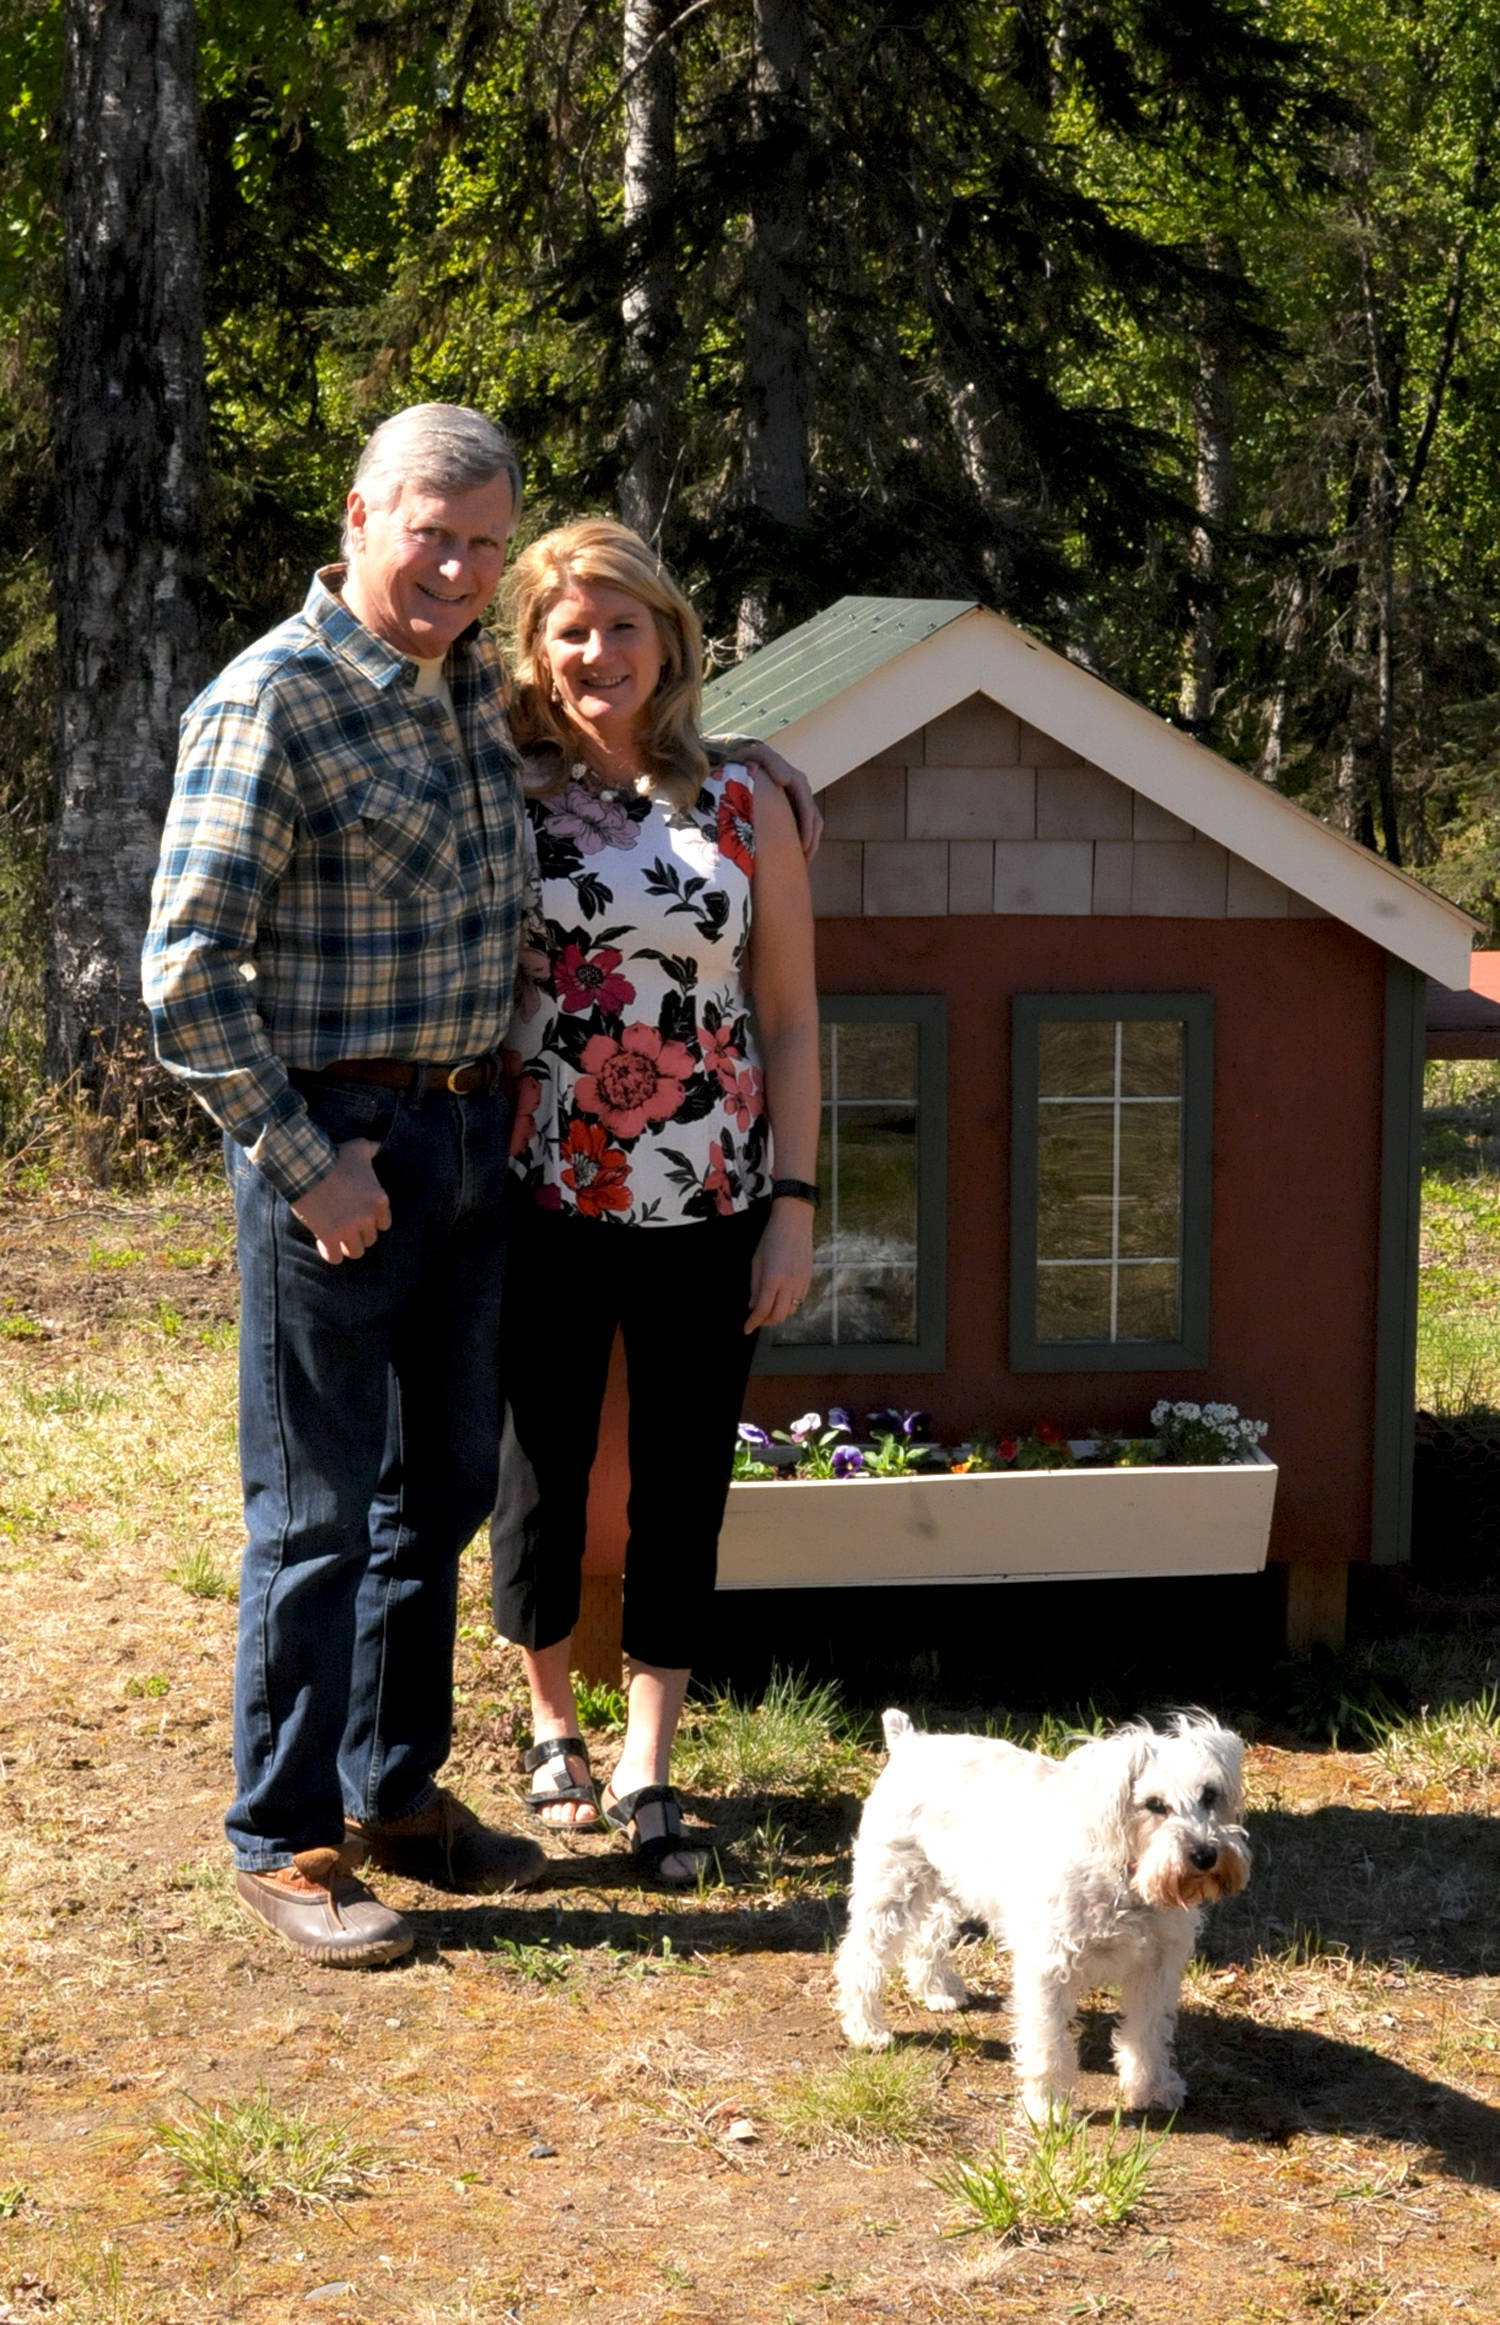 Ted and Elaina Spraker stand in the yard of their home Thursday in Soldotna. The Legislature recently confirmed Ted Spraker for his sixth consecutive term as a member of the Board of Game, where he currently serves as chairman. (Elizabeth Earl/Peninsula Clarion)